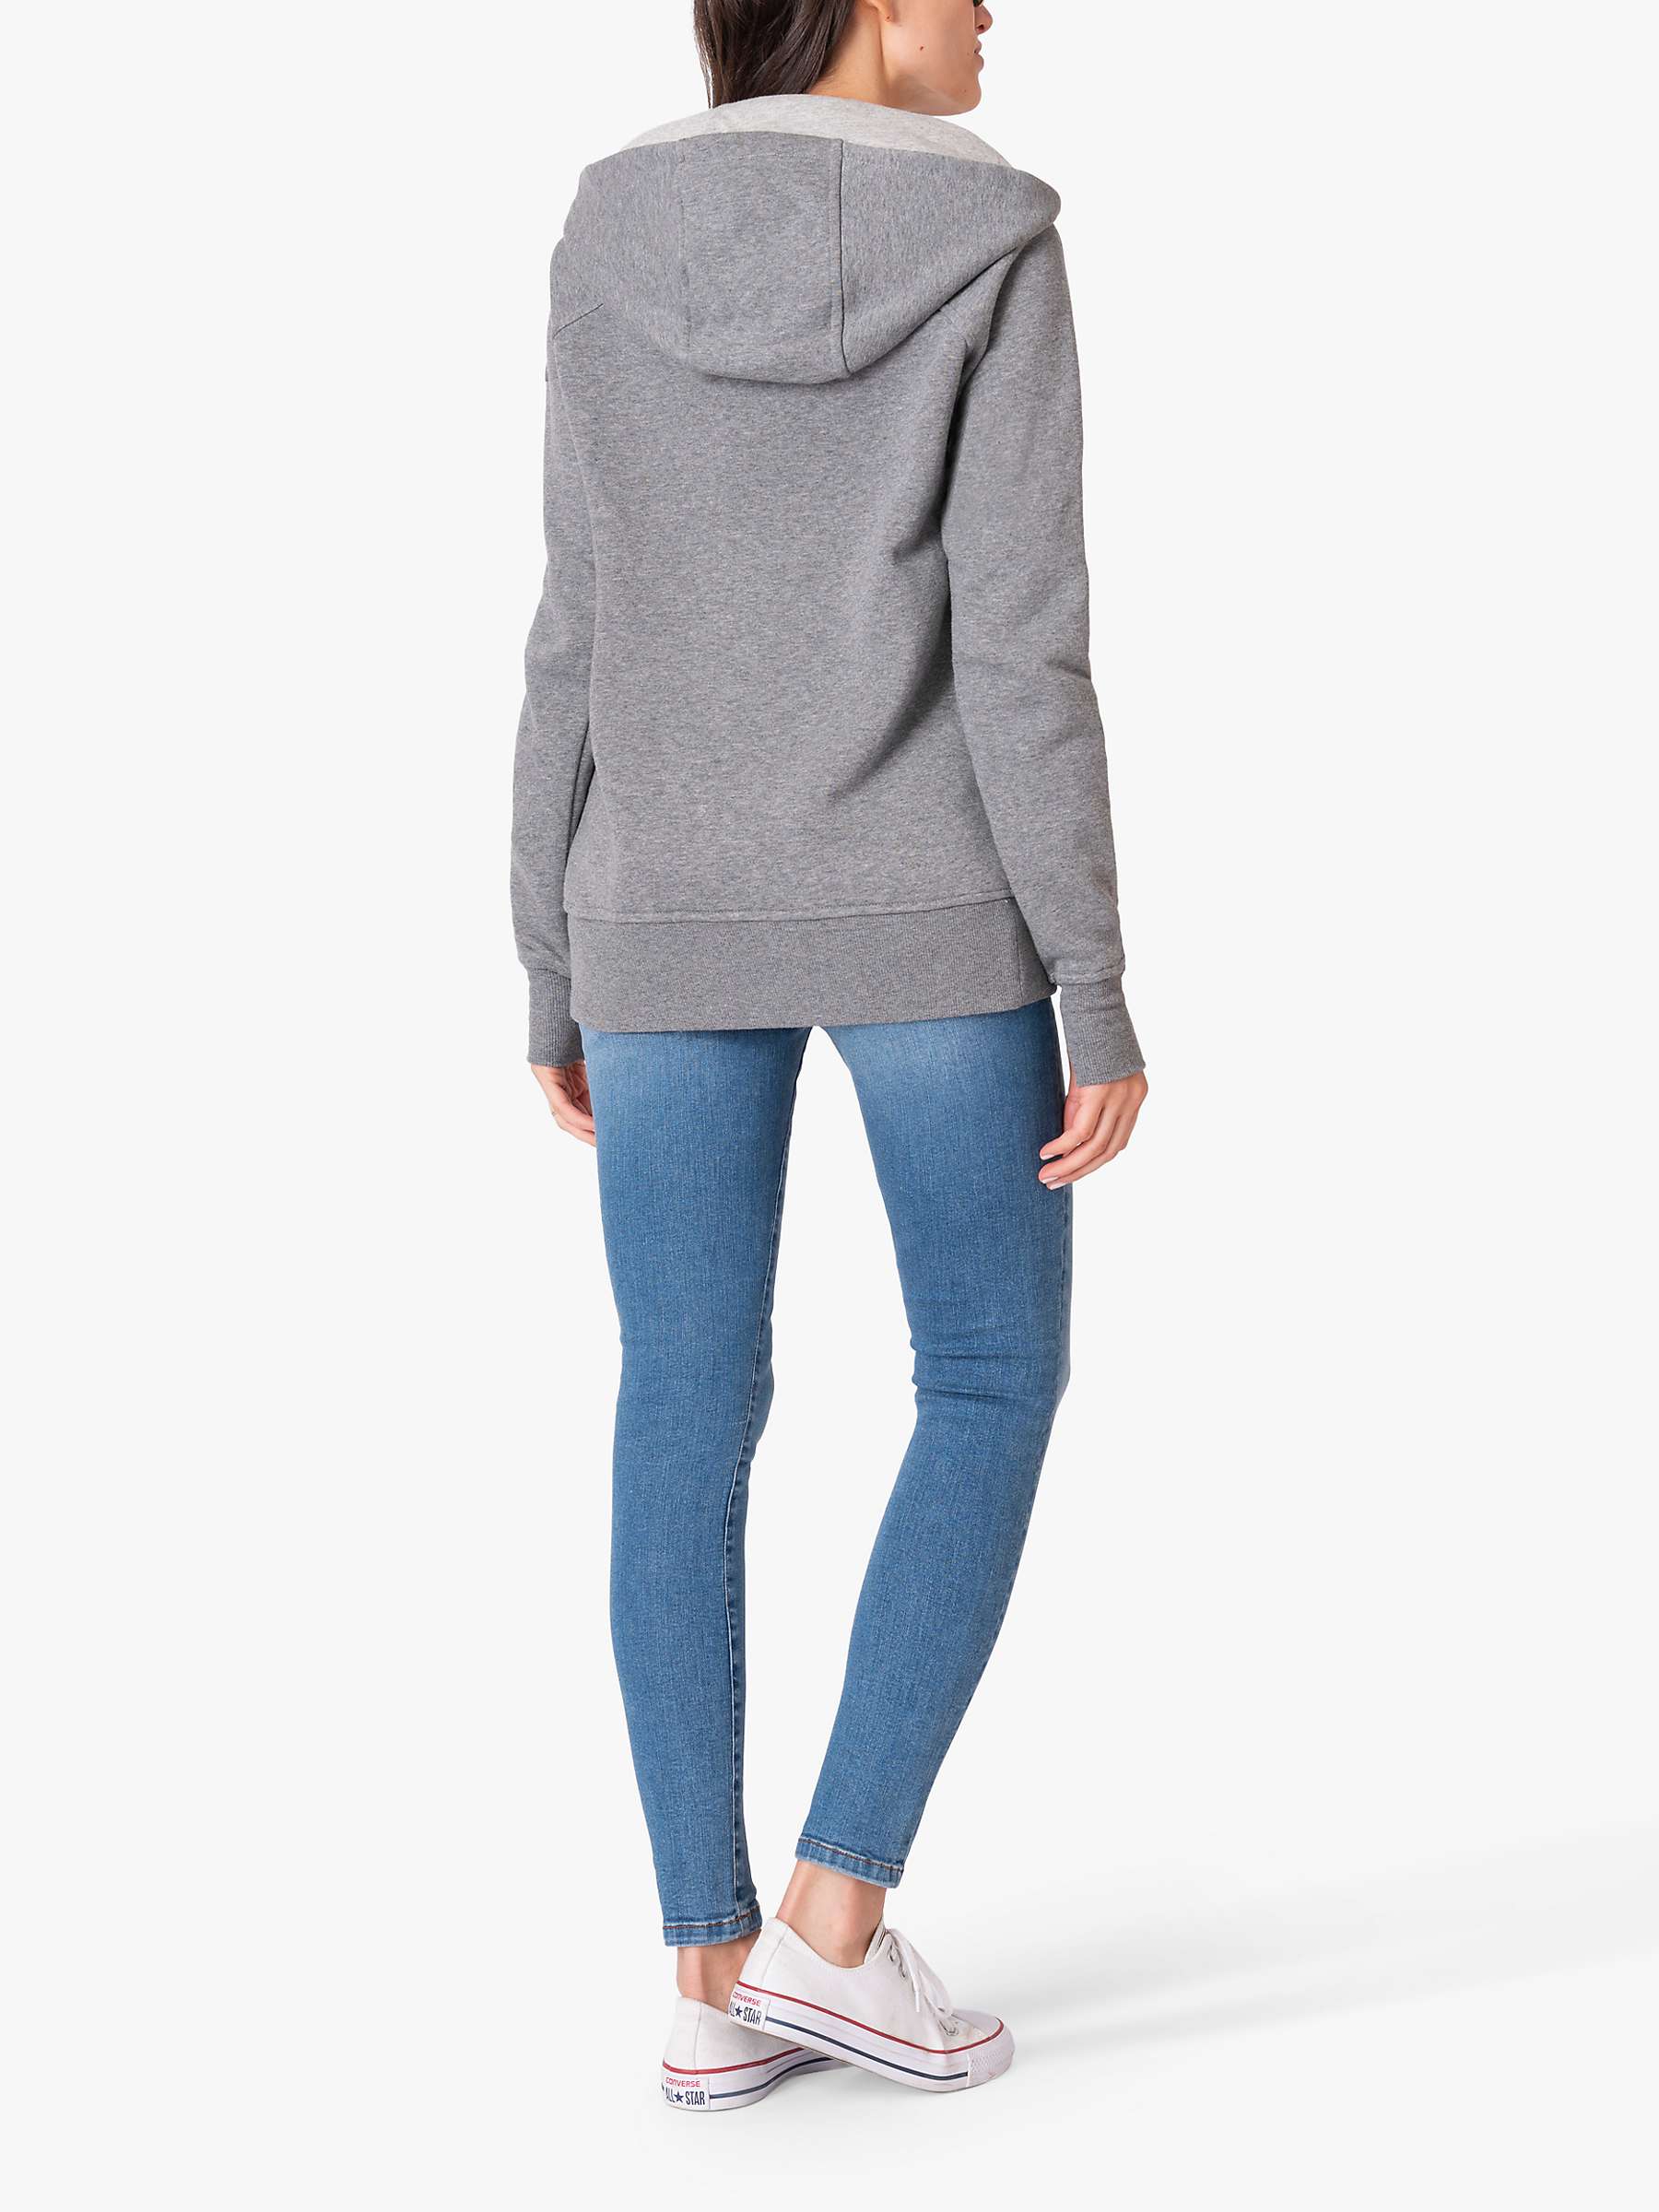 Buy Seraphine Connor 3-in-1 Maternity Hoodie, Charcoal Online at johnlewis.com